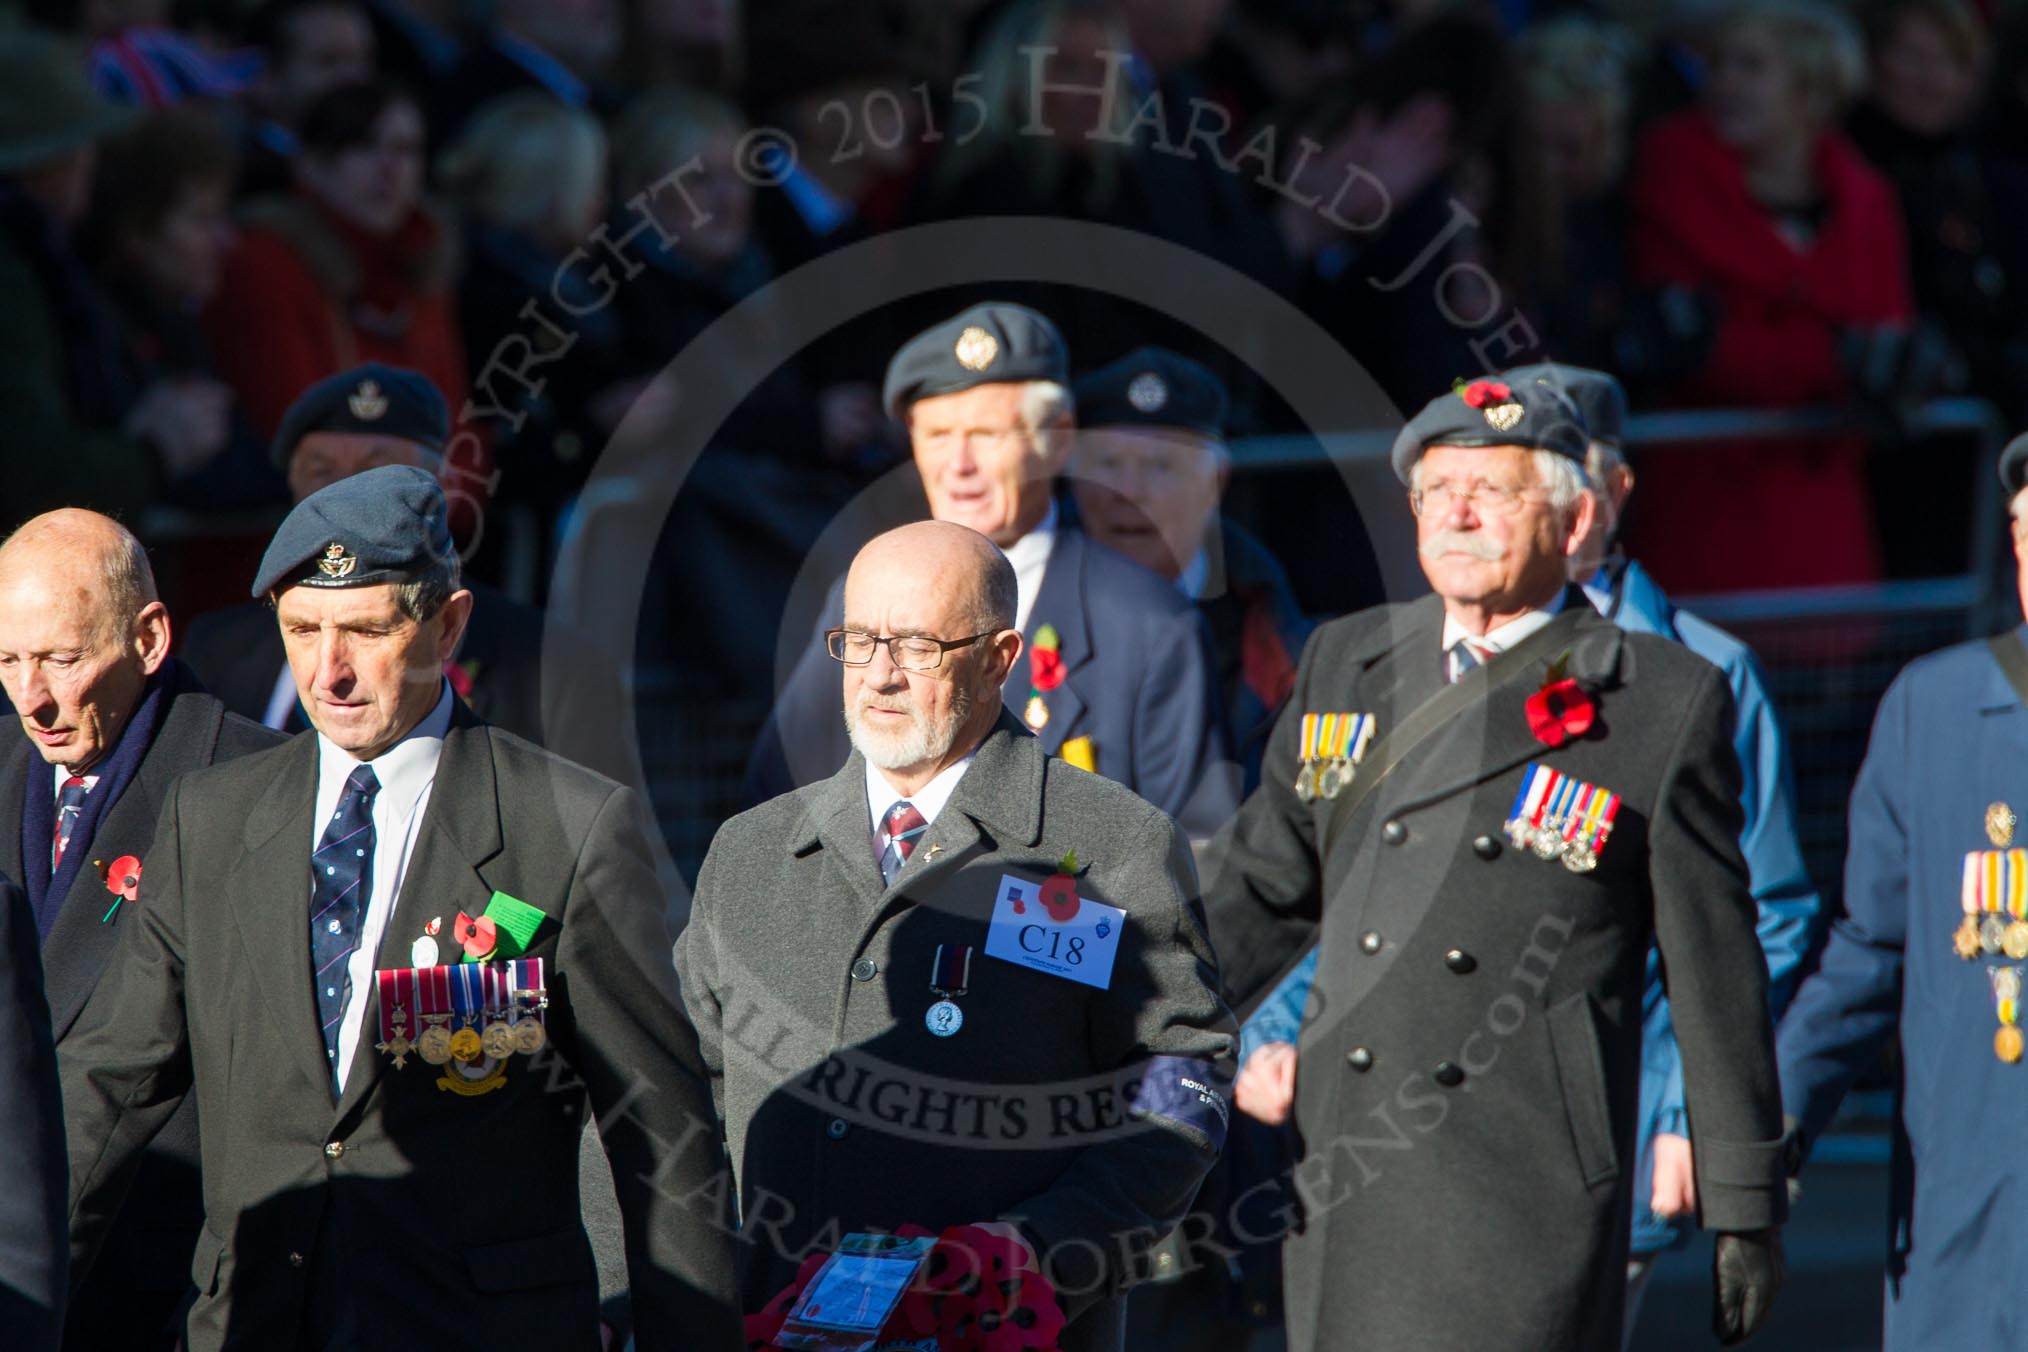 Remembrance Sunday Cenotaph March Past 2013: C18 - Royal Air Force Butterworth & Penang Association..
Press stand opposite the Foreign Office building, Whitehall, London SW1,
London,
Greater London,
United Kingdom,
on 10 November 2013 at 12:08, image #1817